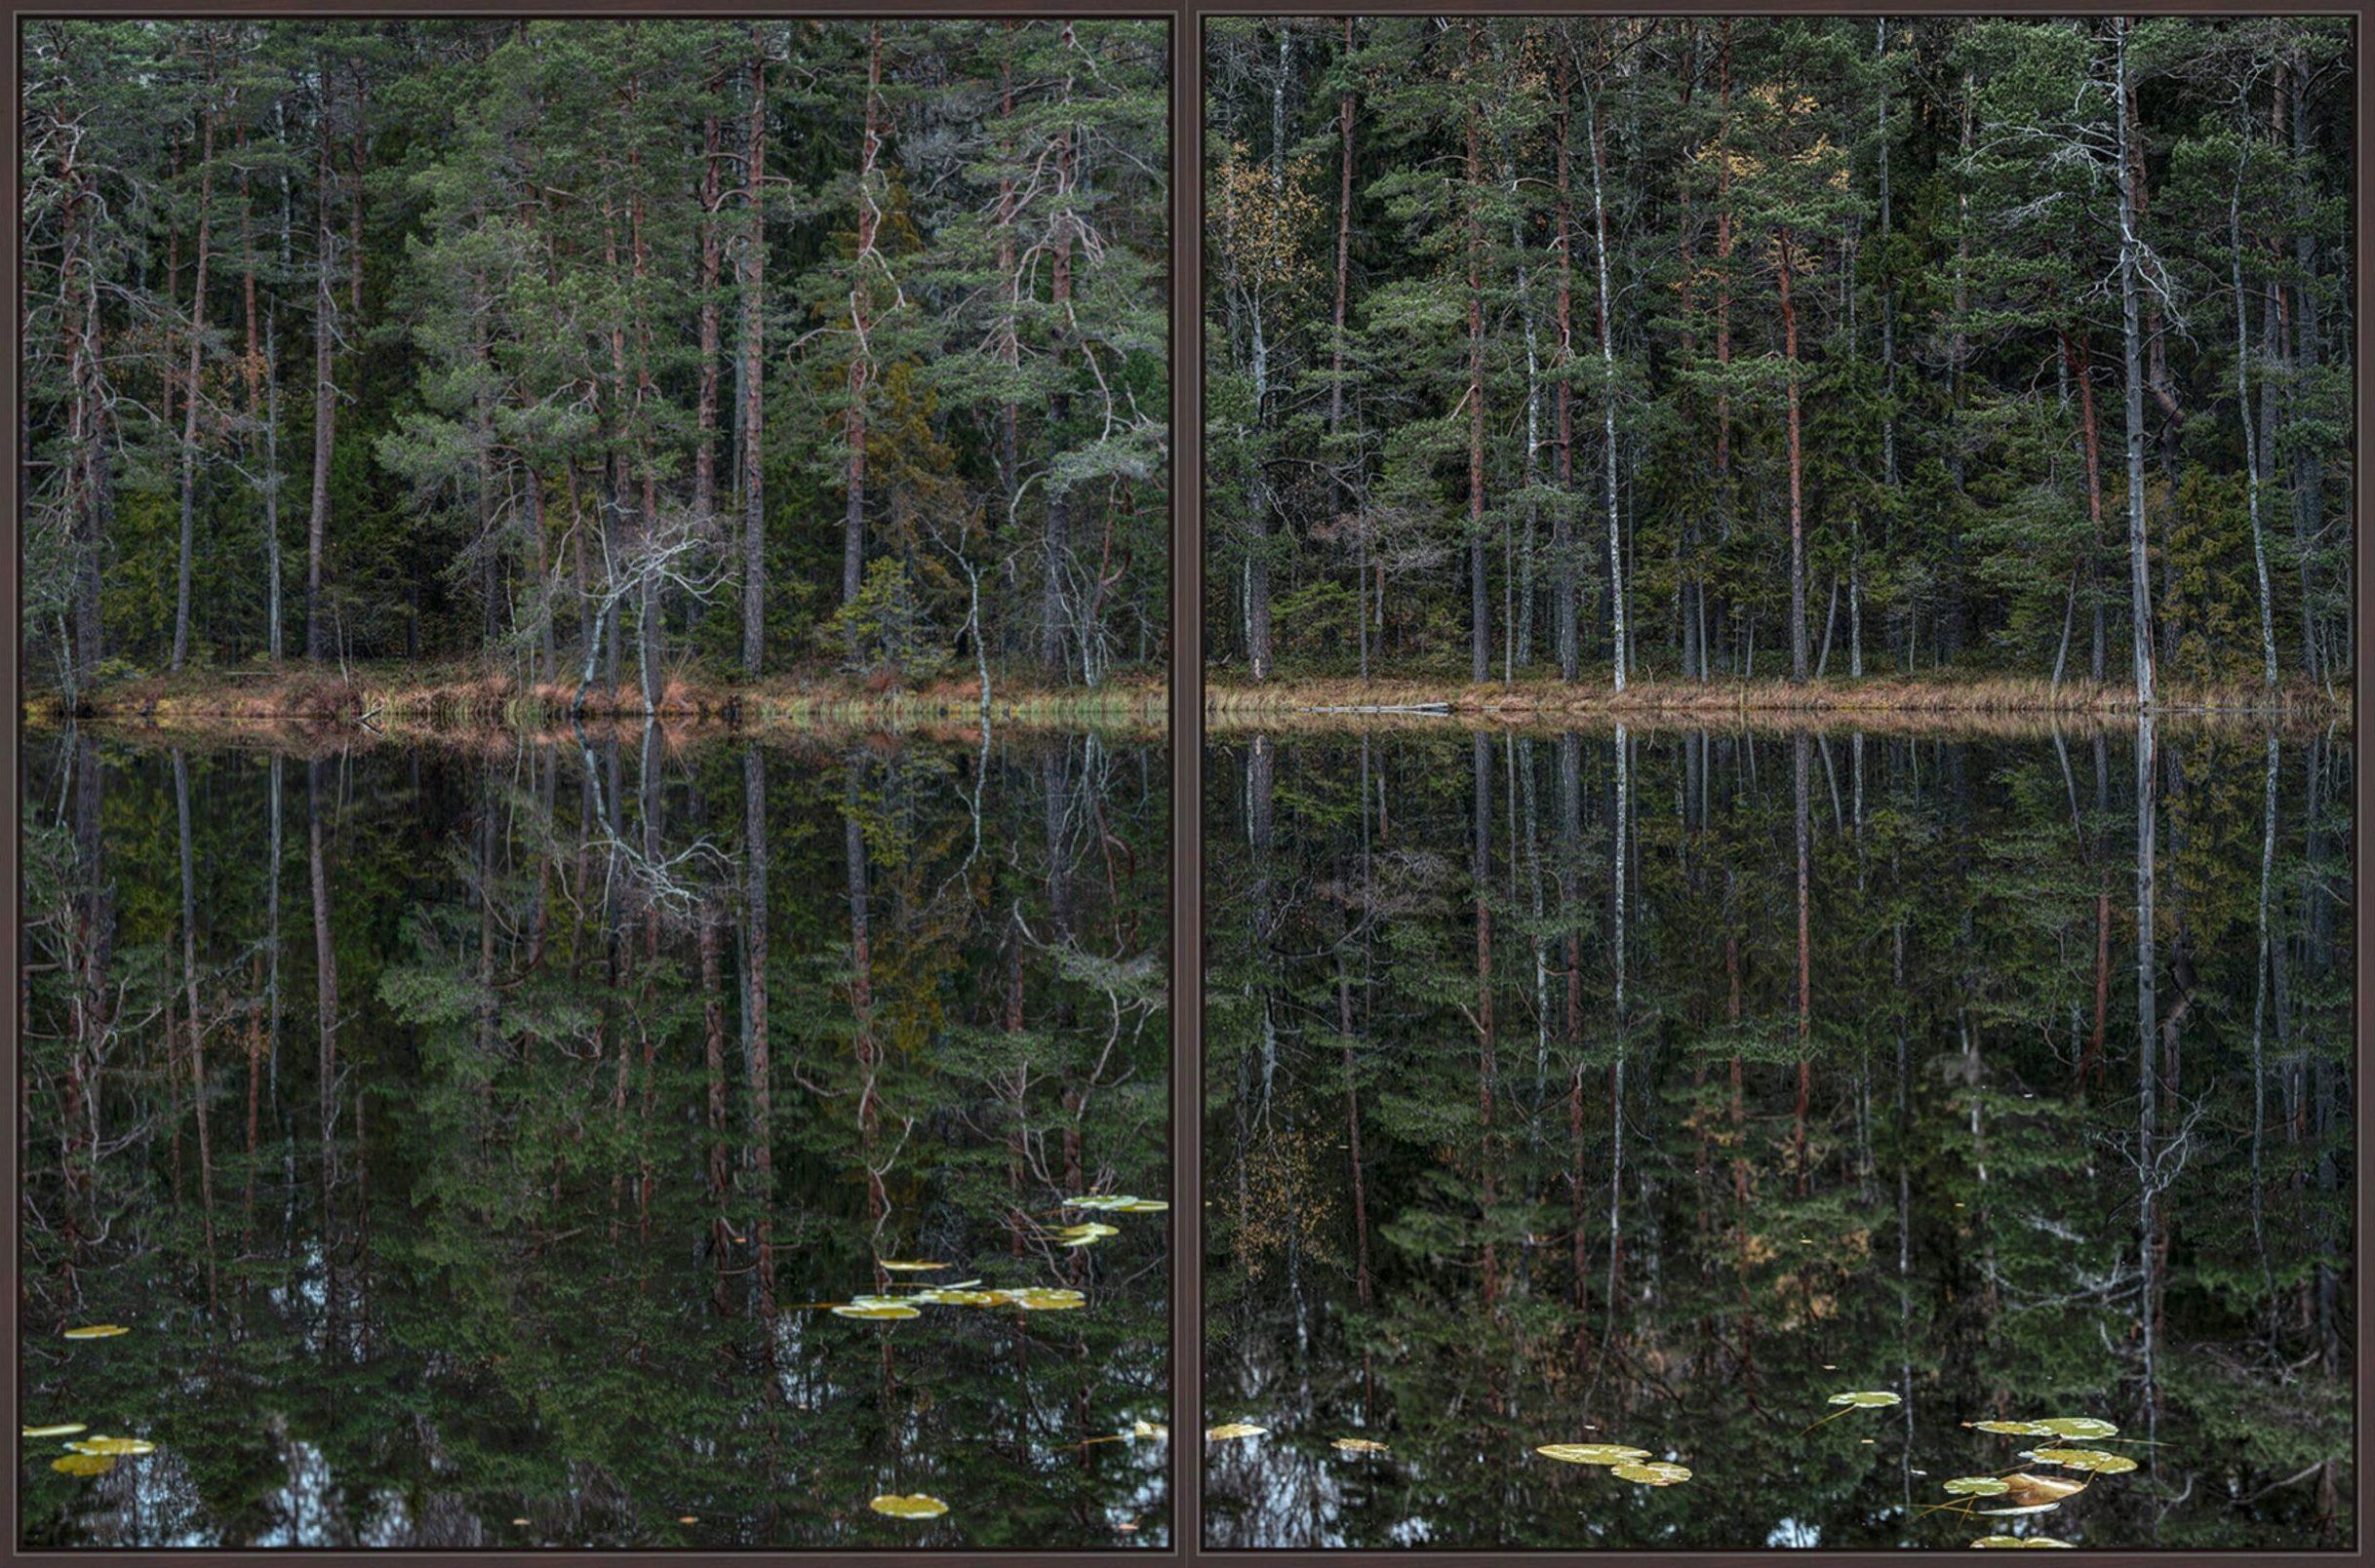 Deep Mirroring Forest 011 is a limited-edition photograph by German contemporary artist Bernhard Lang. 

This photograph is sold unframed as a print only. It is available in 5 dimensions:
*60 × 90 cm (23.6 × 35.4 in), edition of 5 copies
*80 × 120